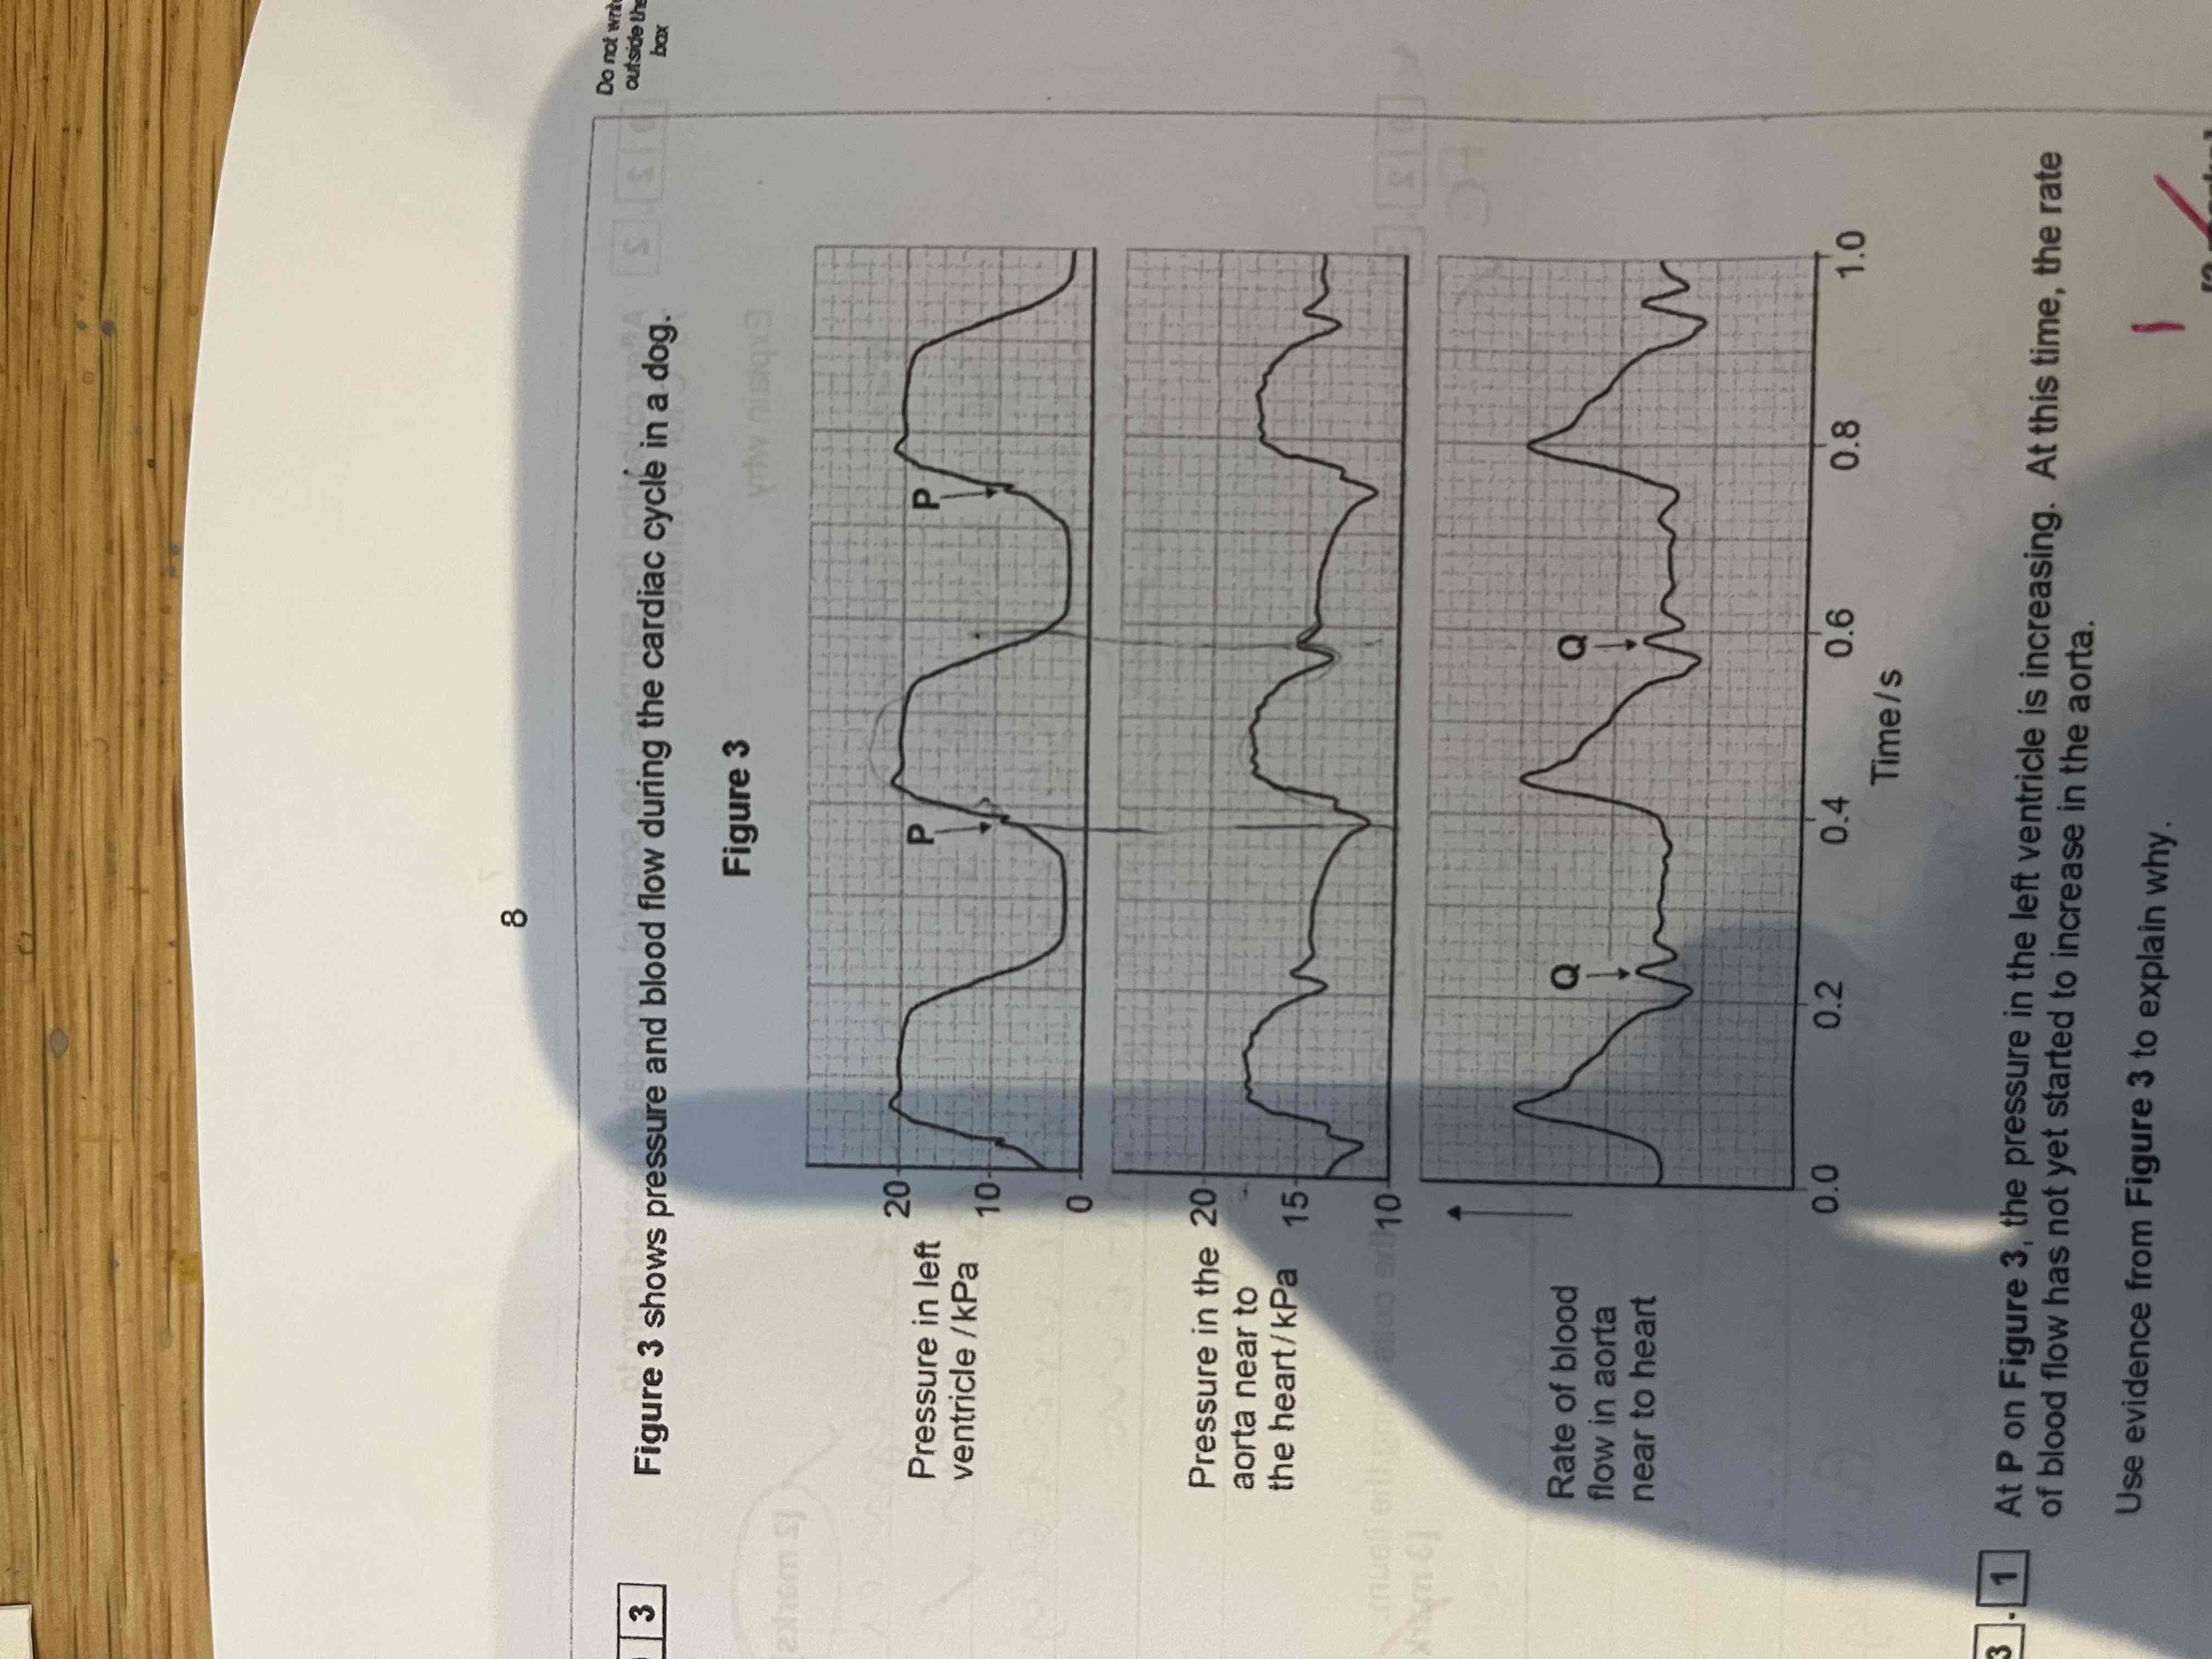 <p>At Q on figure 3 there is a small increase in pressure and in rate of blood flow in the aorta.</p><p>Explain how this happens and its importance.</p>